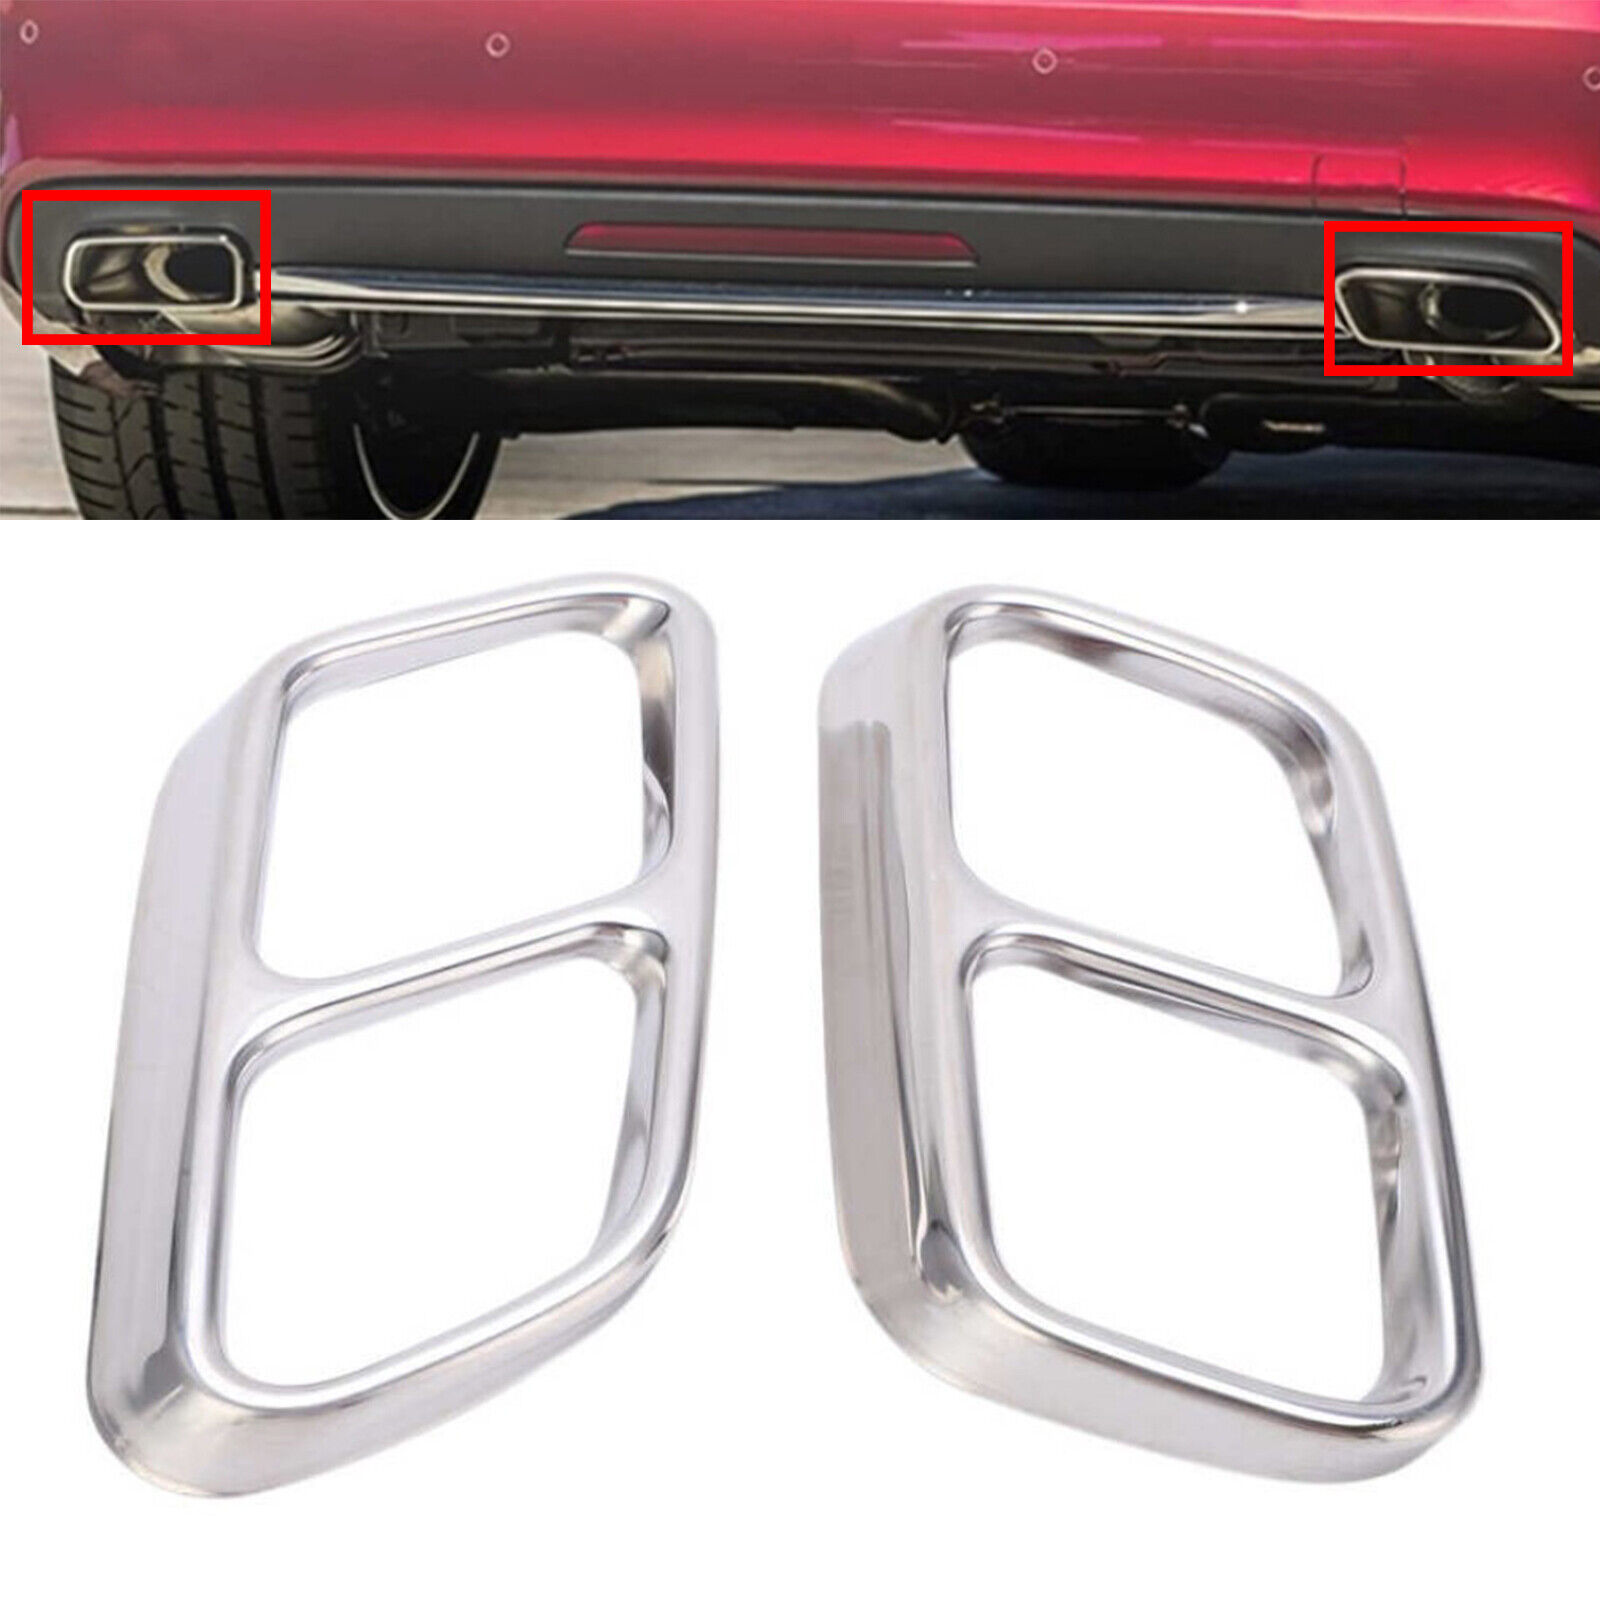 2pcs Gloss Silver Stainless Exhaust Muffler Tip Cover Fits 13-15 X204 GLK350